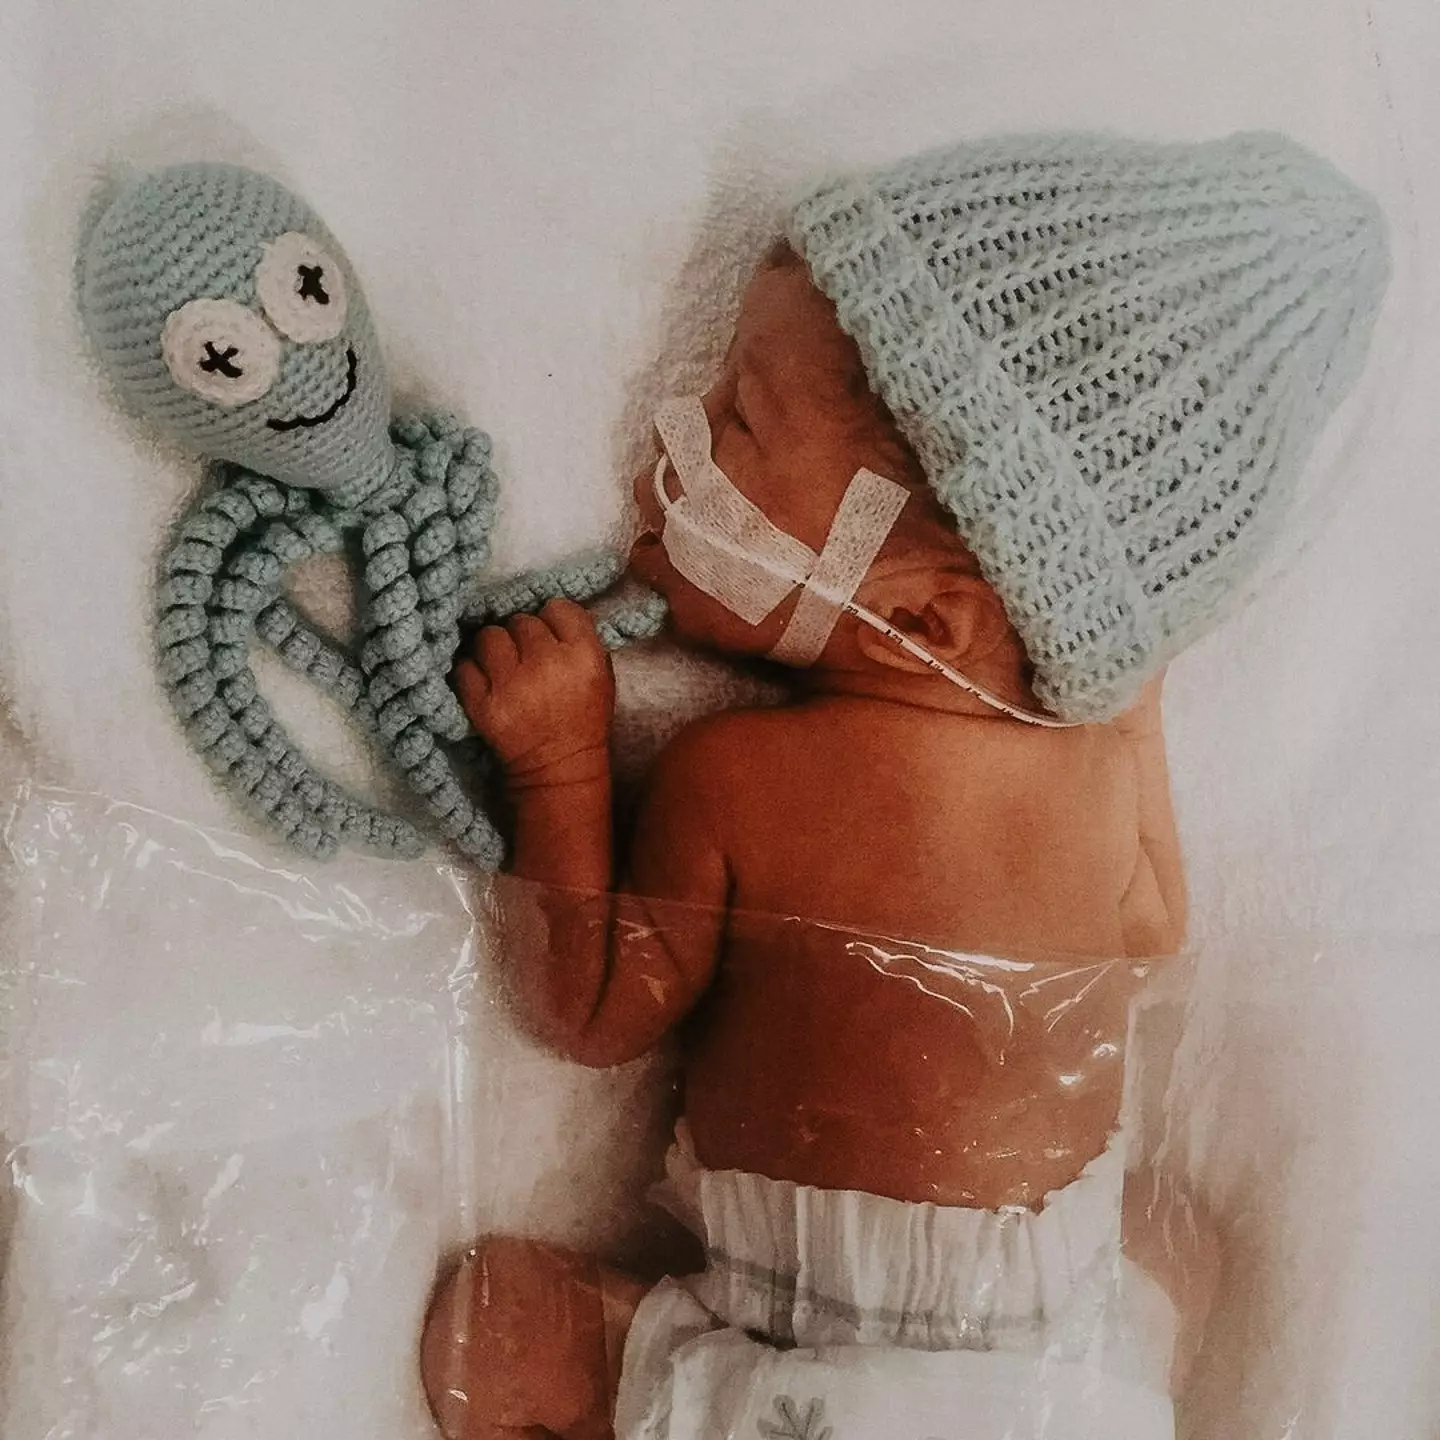 One mum has explained why octopus cuddly toys 'aren't just cute'.